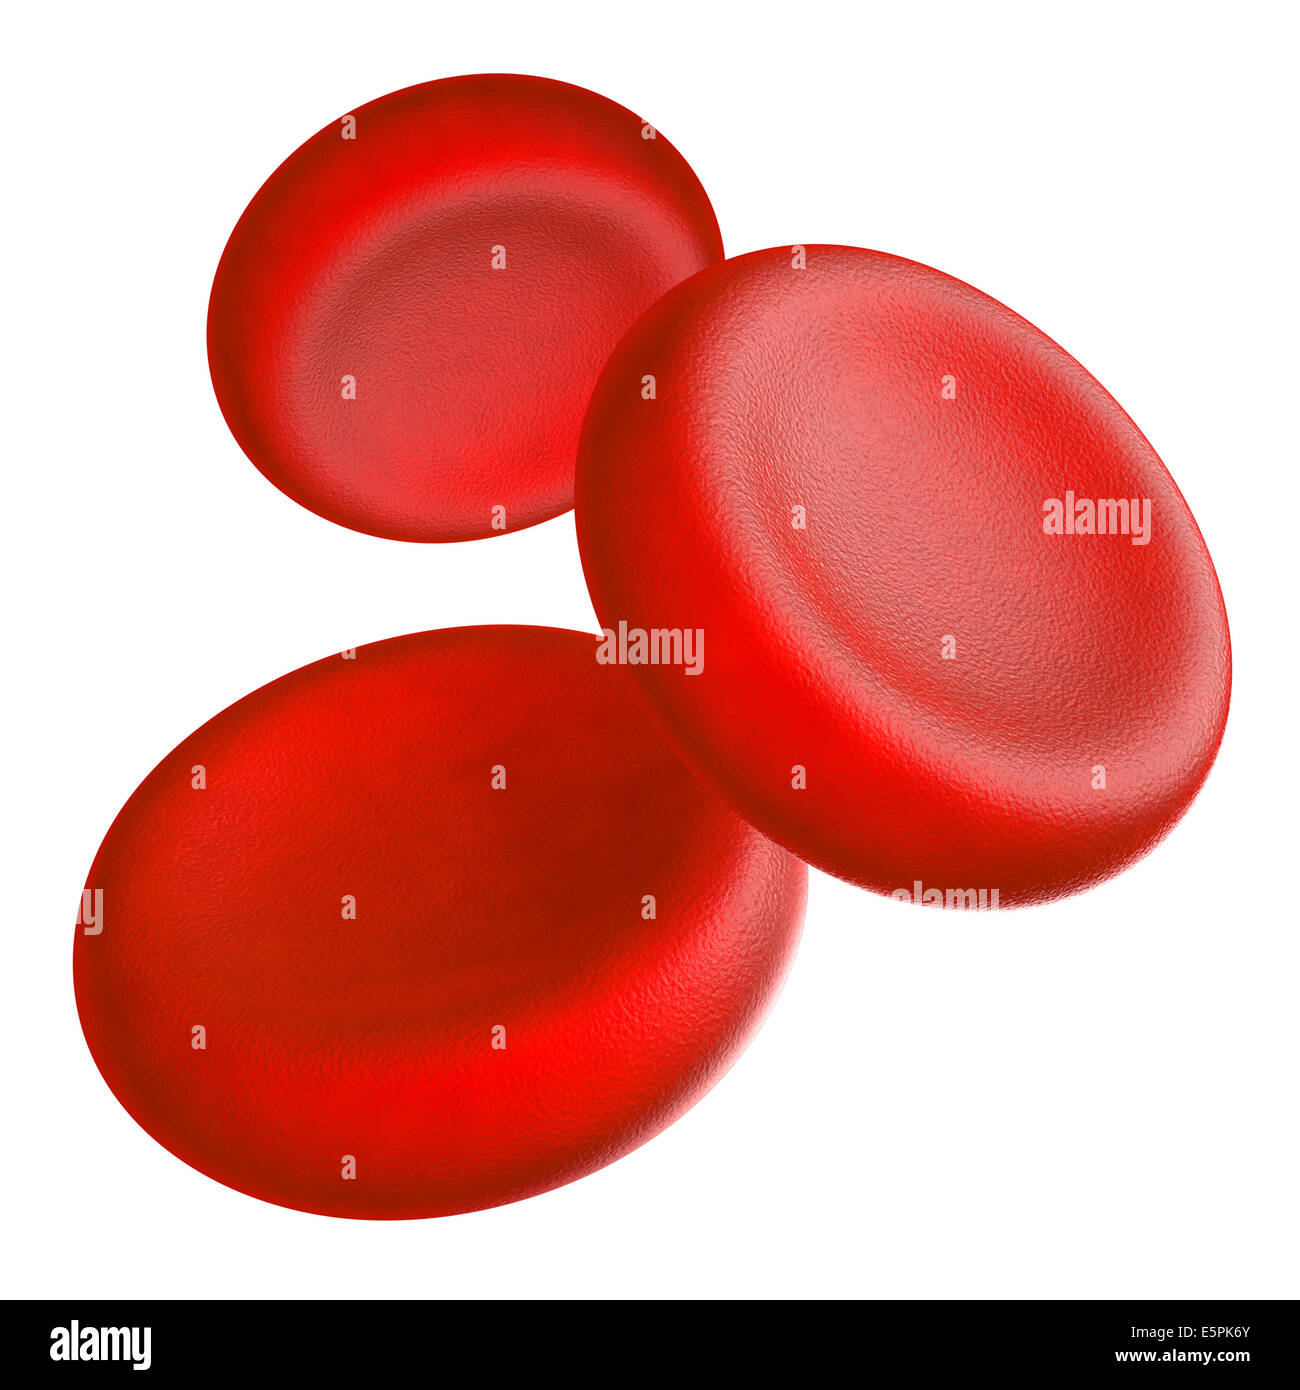 Illustration of human blood cells - isolated on white Stock Photo